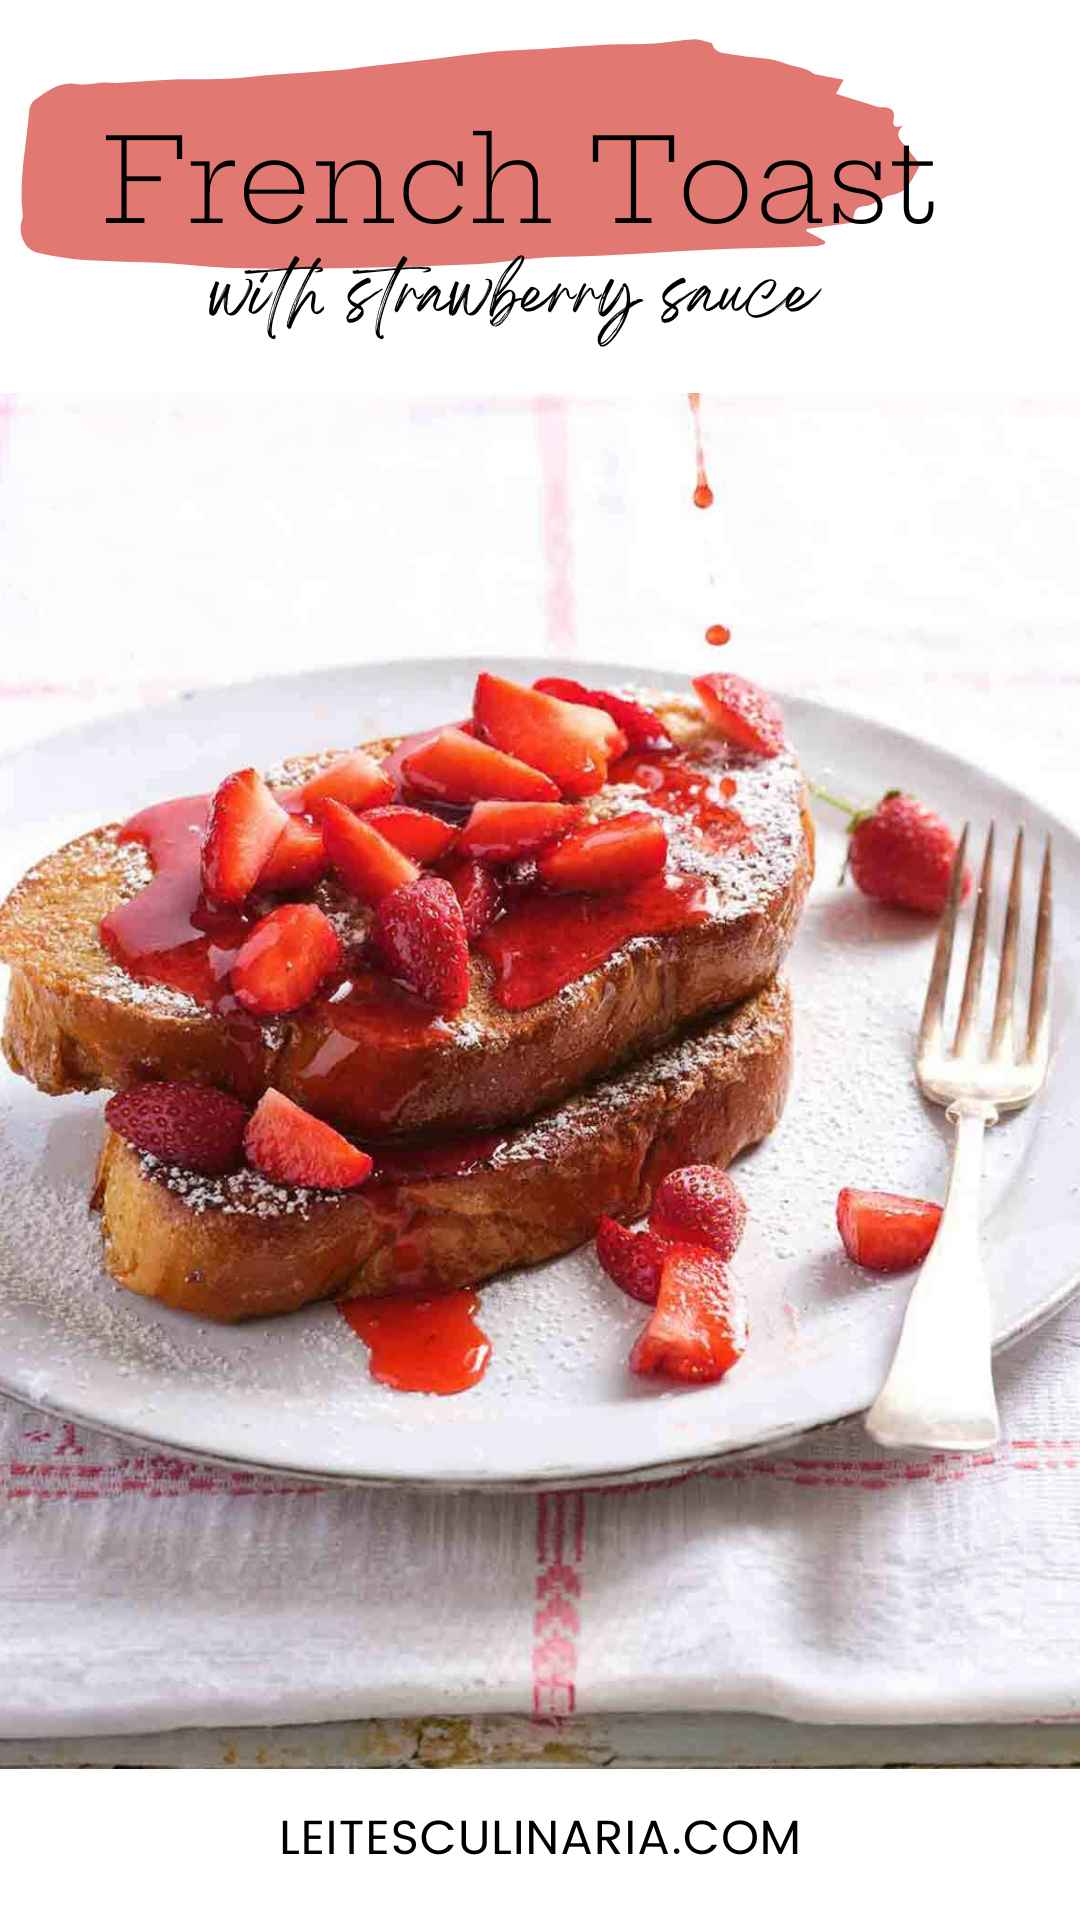 Two pieces of French toast on a plate with fresh strawberries and strawberry syrup on top.